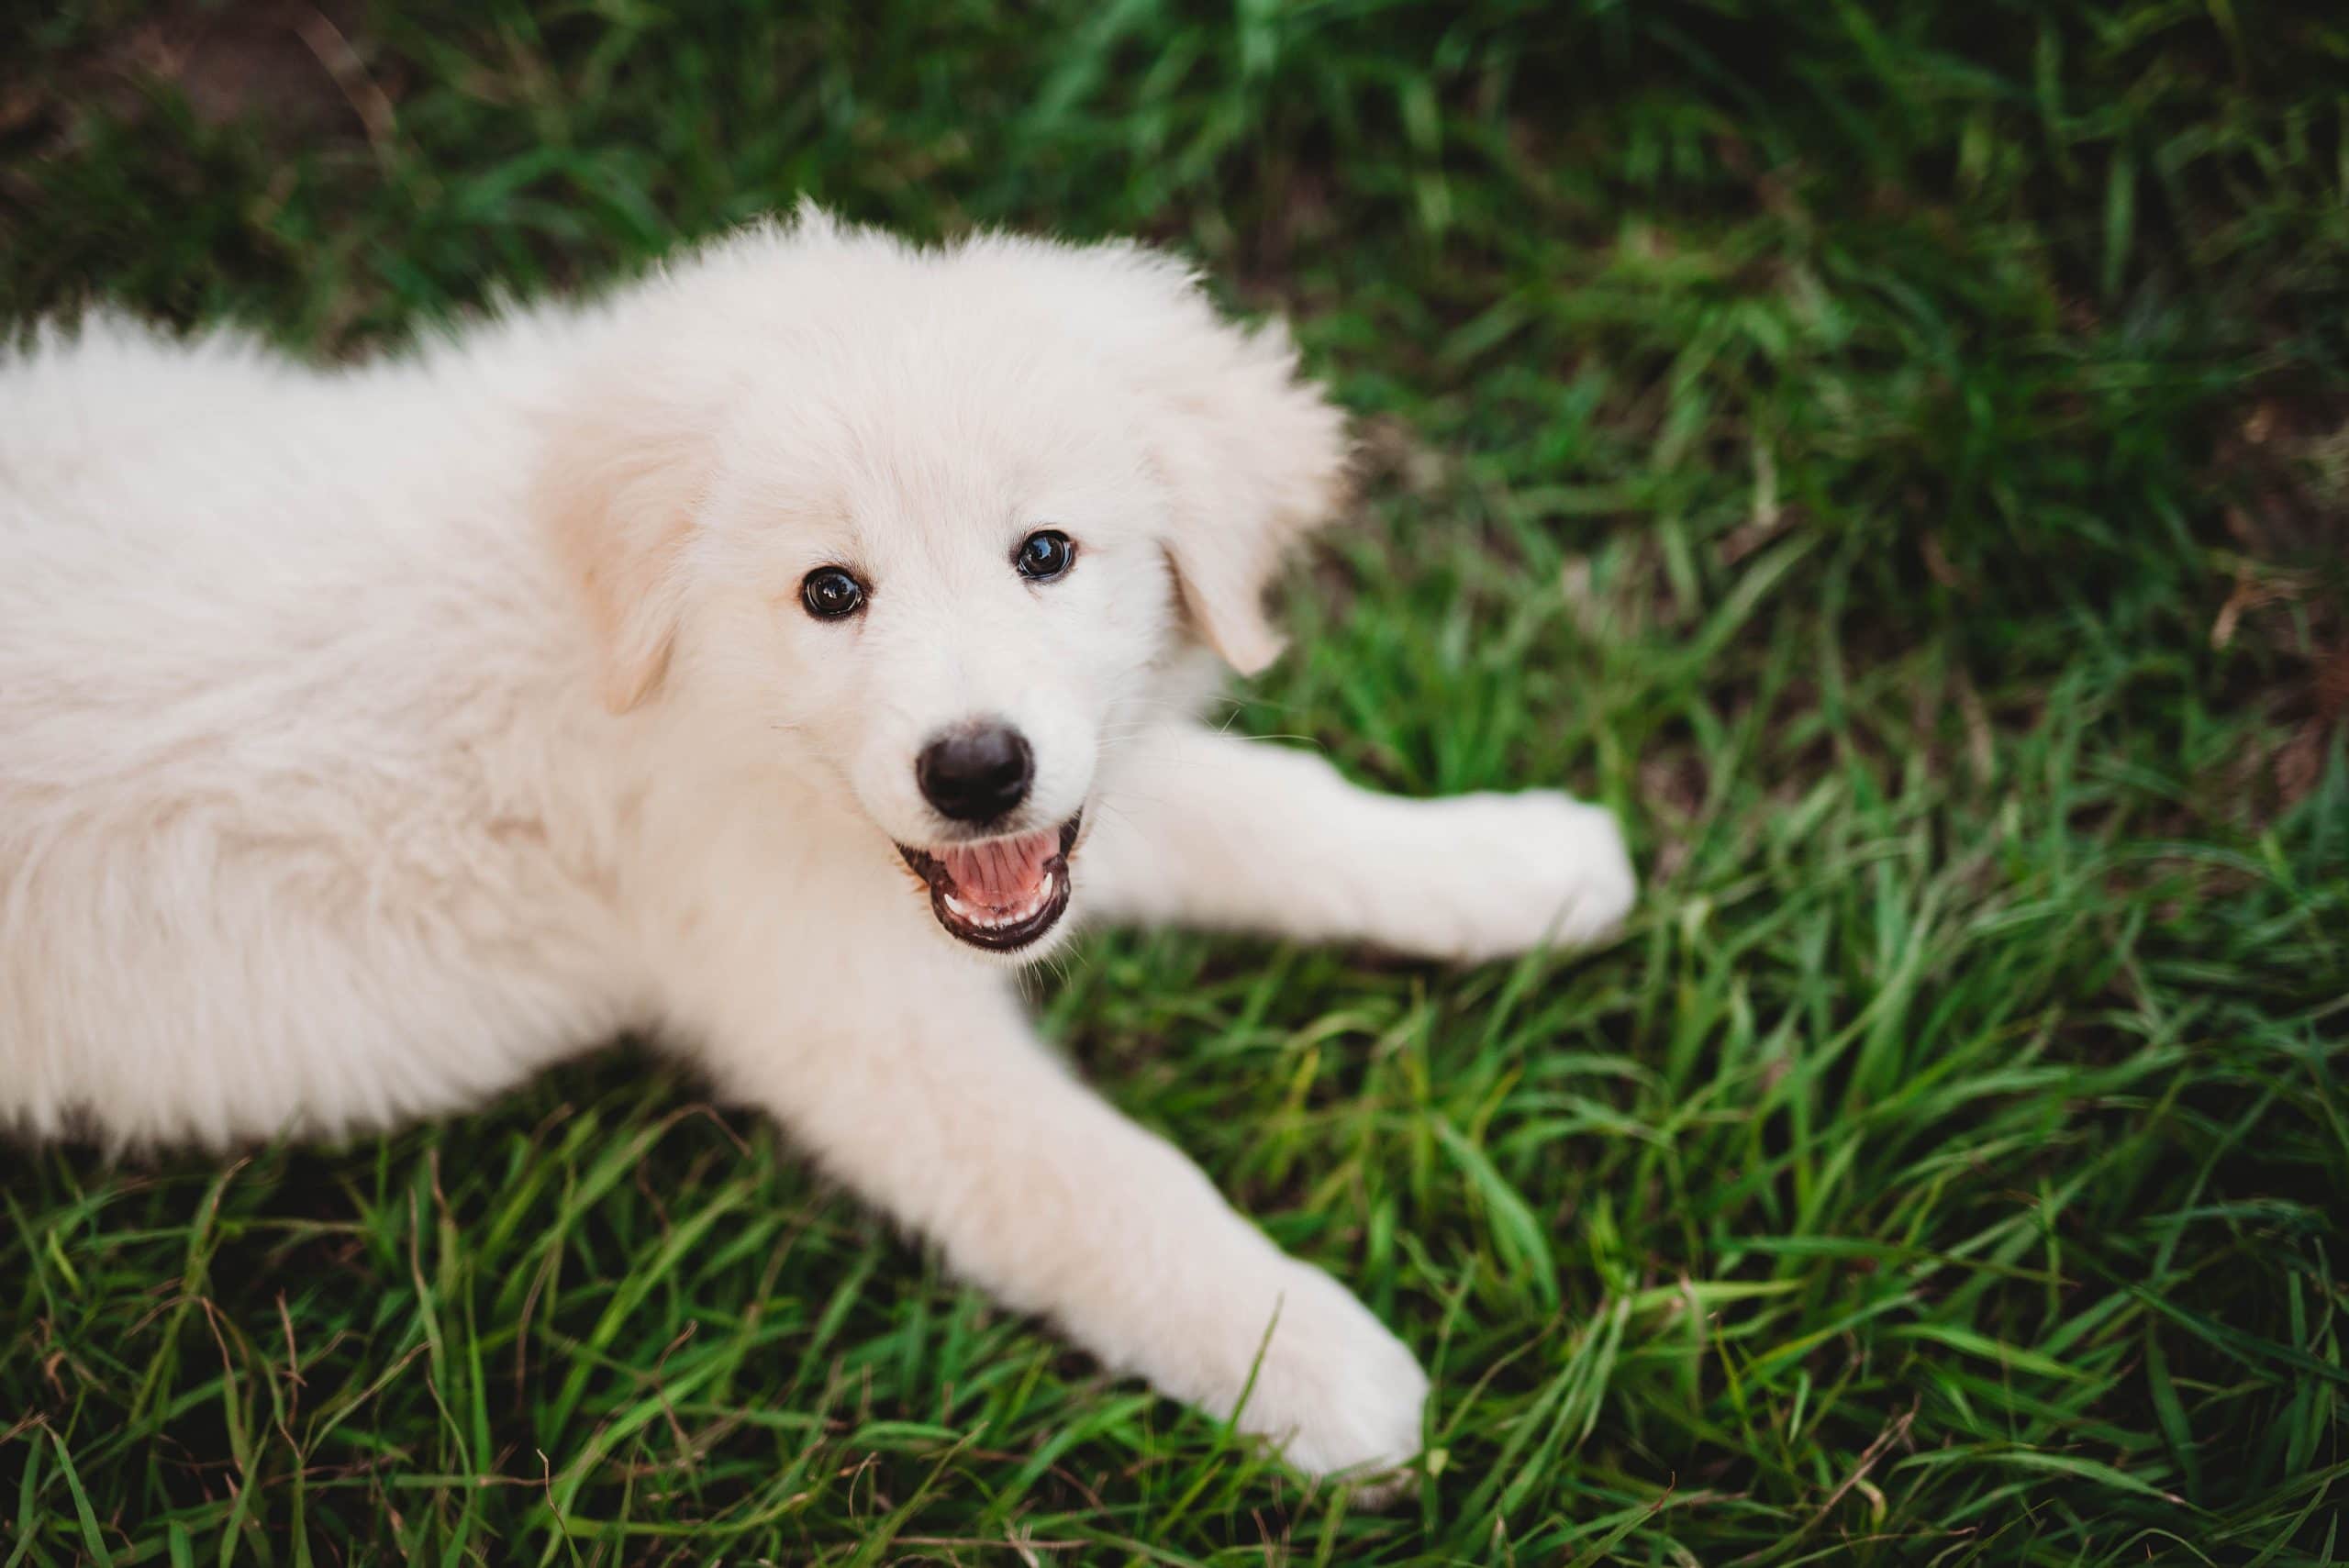 Babies and Puppies and Kiddies, Oh My! | Personal, The Farm - Jennifer Duke Photography